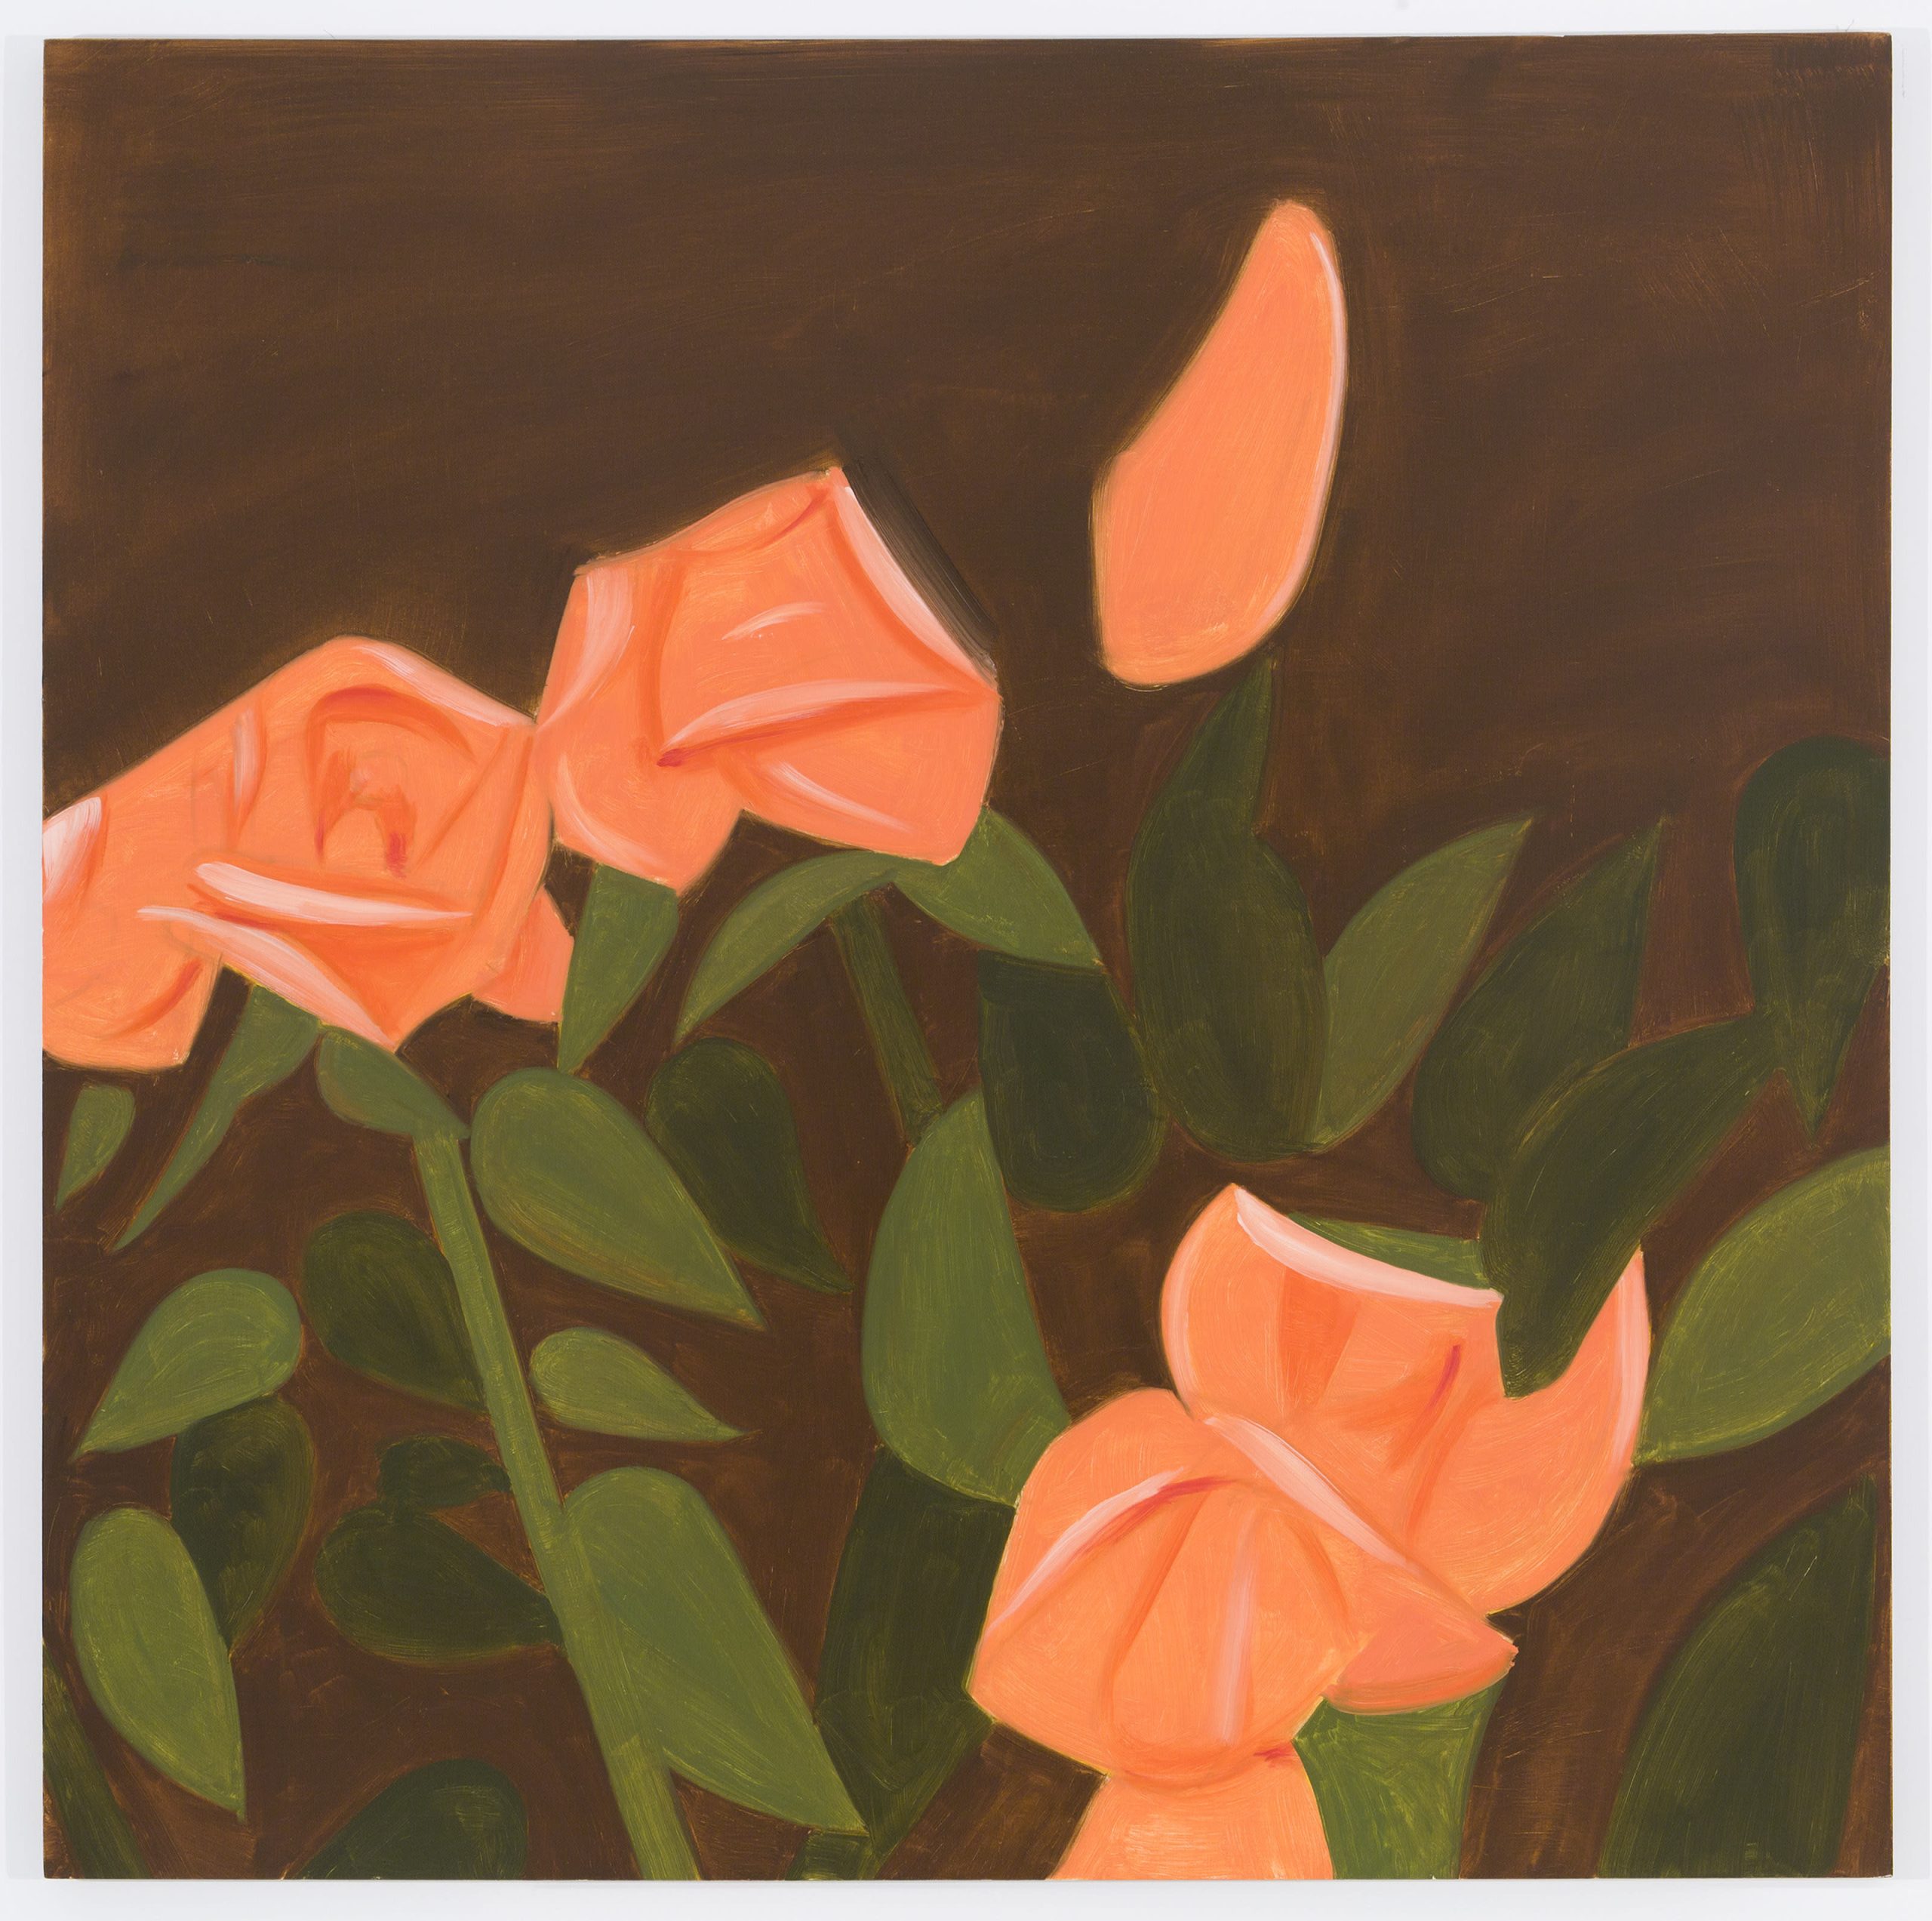 Alex Katz Pink Roses 2, 2012, Painting Oil on linen, 152.4 x 152.4 (cm), 60.0 x 60.0 (inch), USD 750,001 – 1,000,000 at Gladstone Gallery